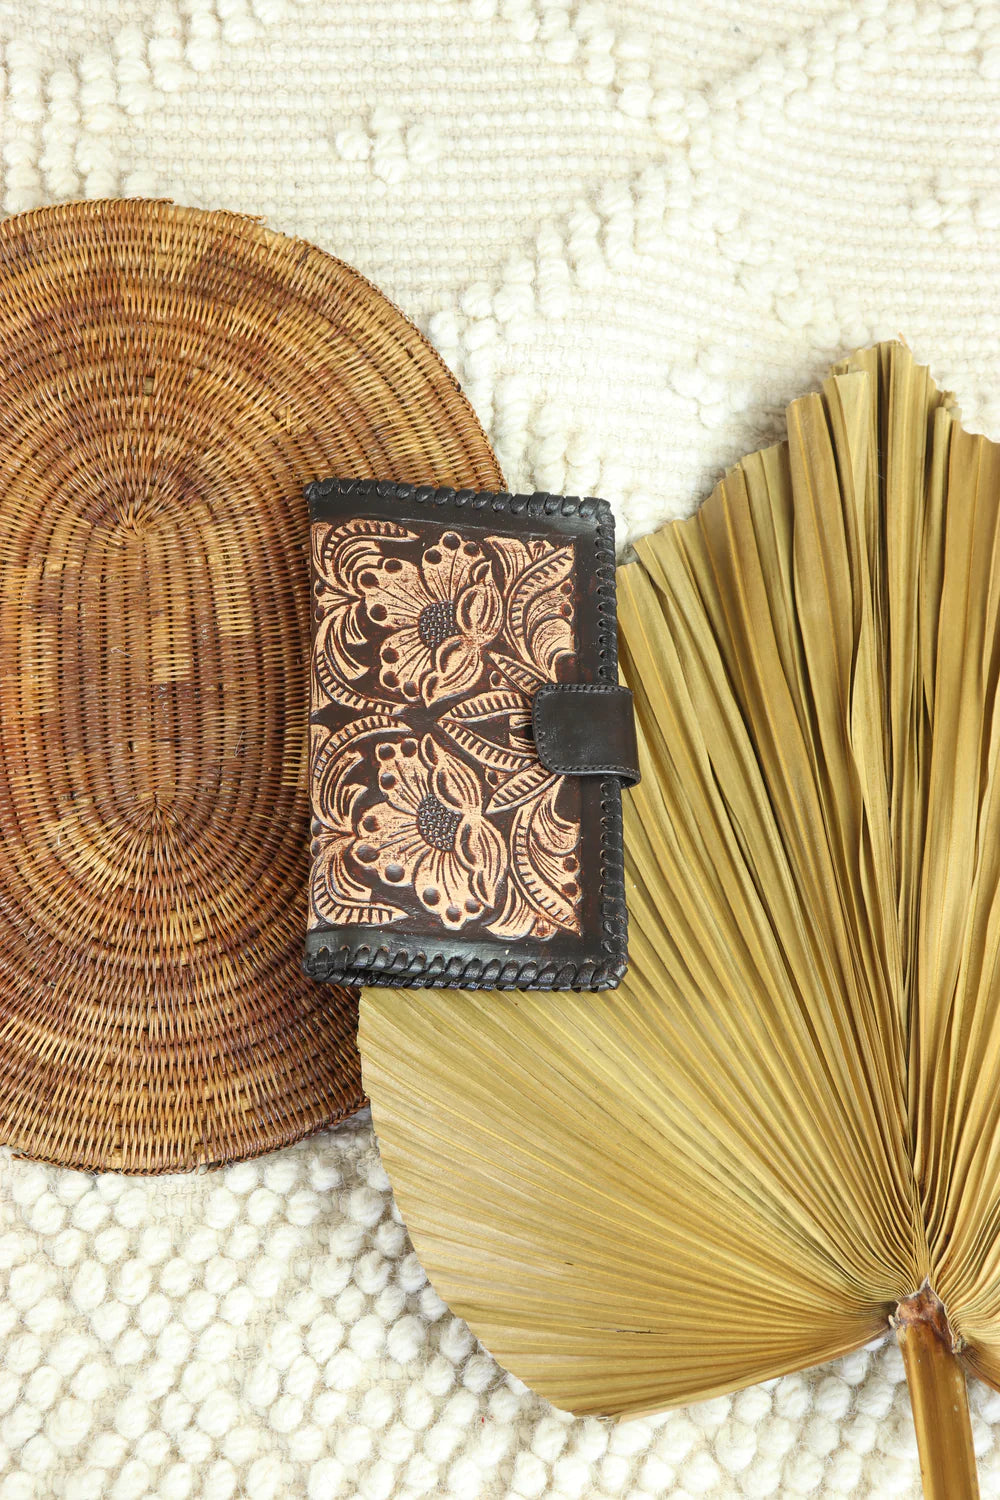 Sunflower Leather Wallet